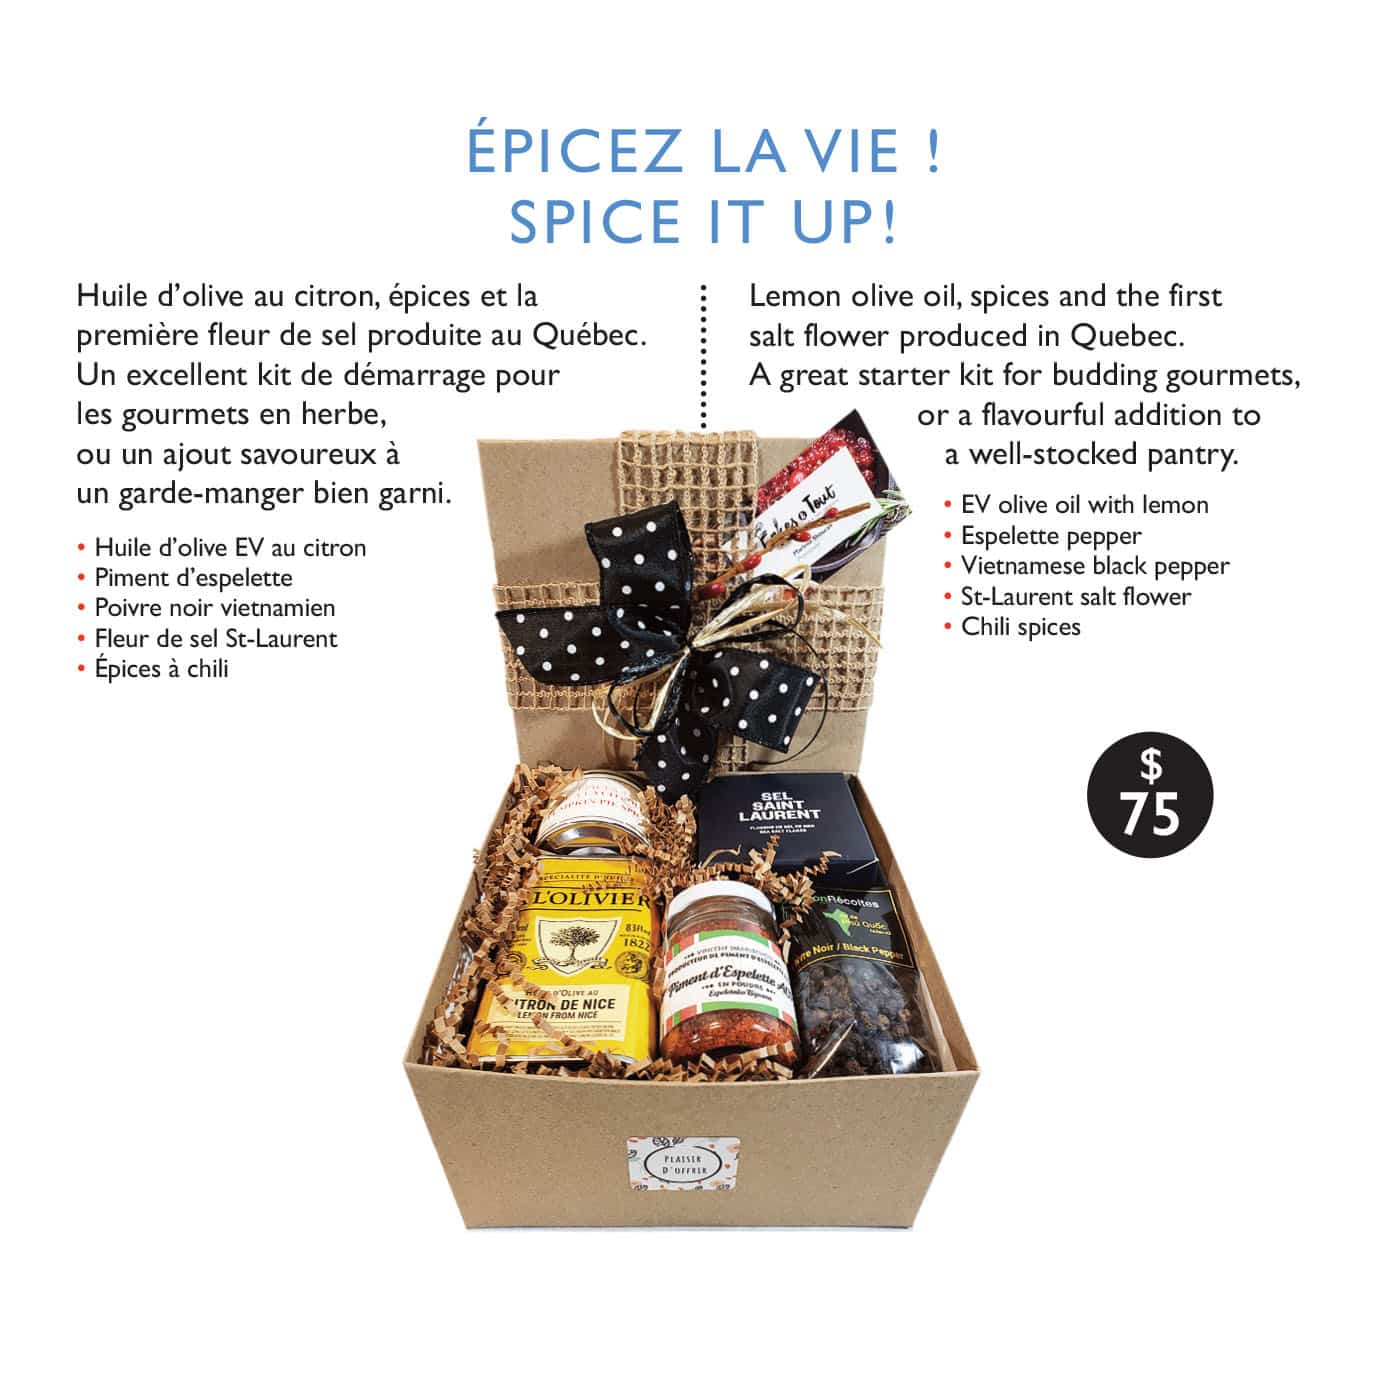 Gift box with spices